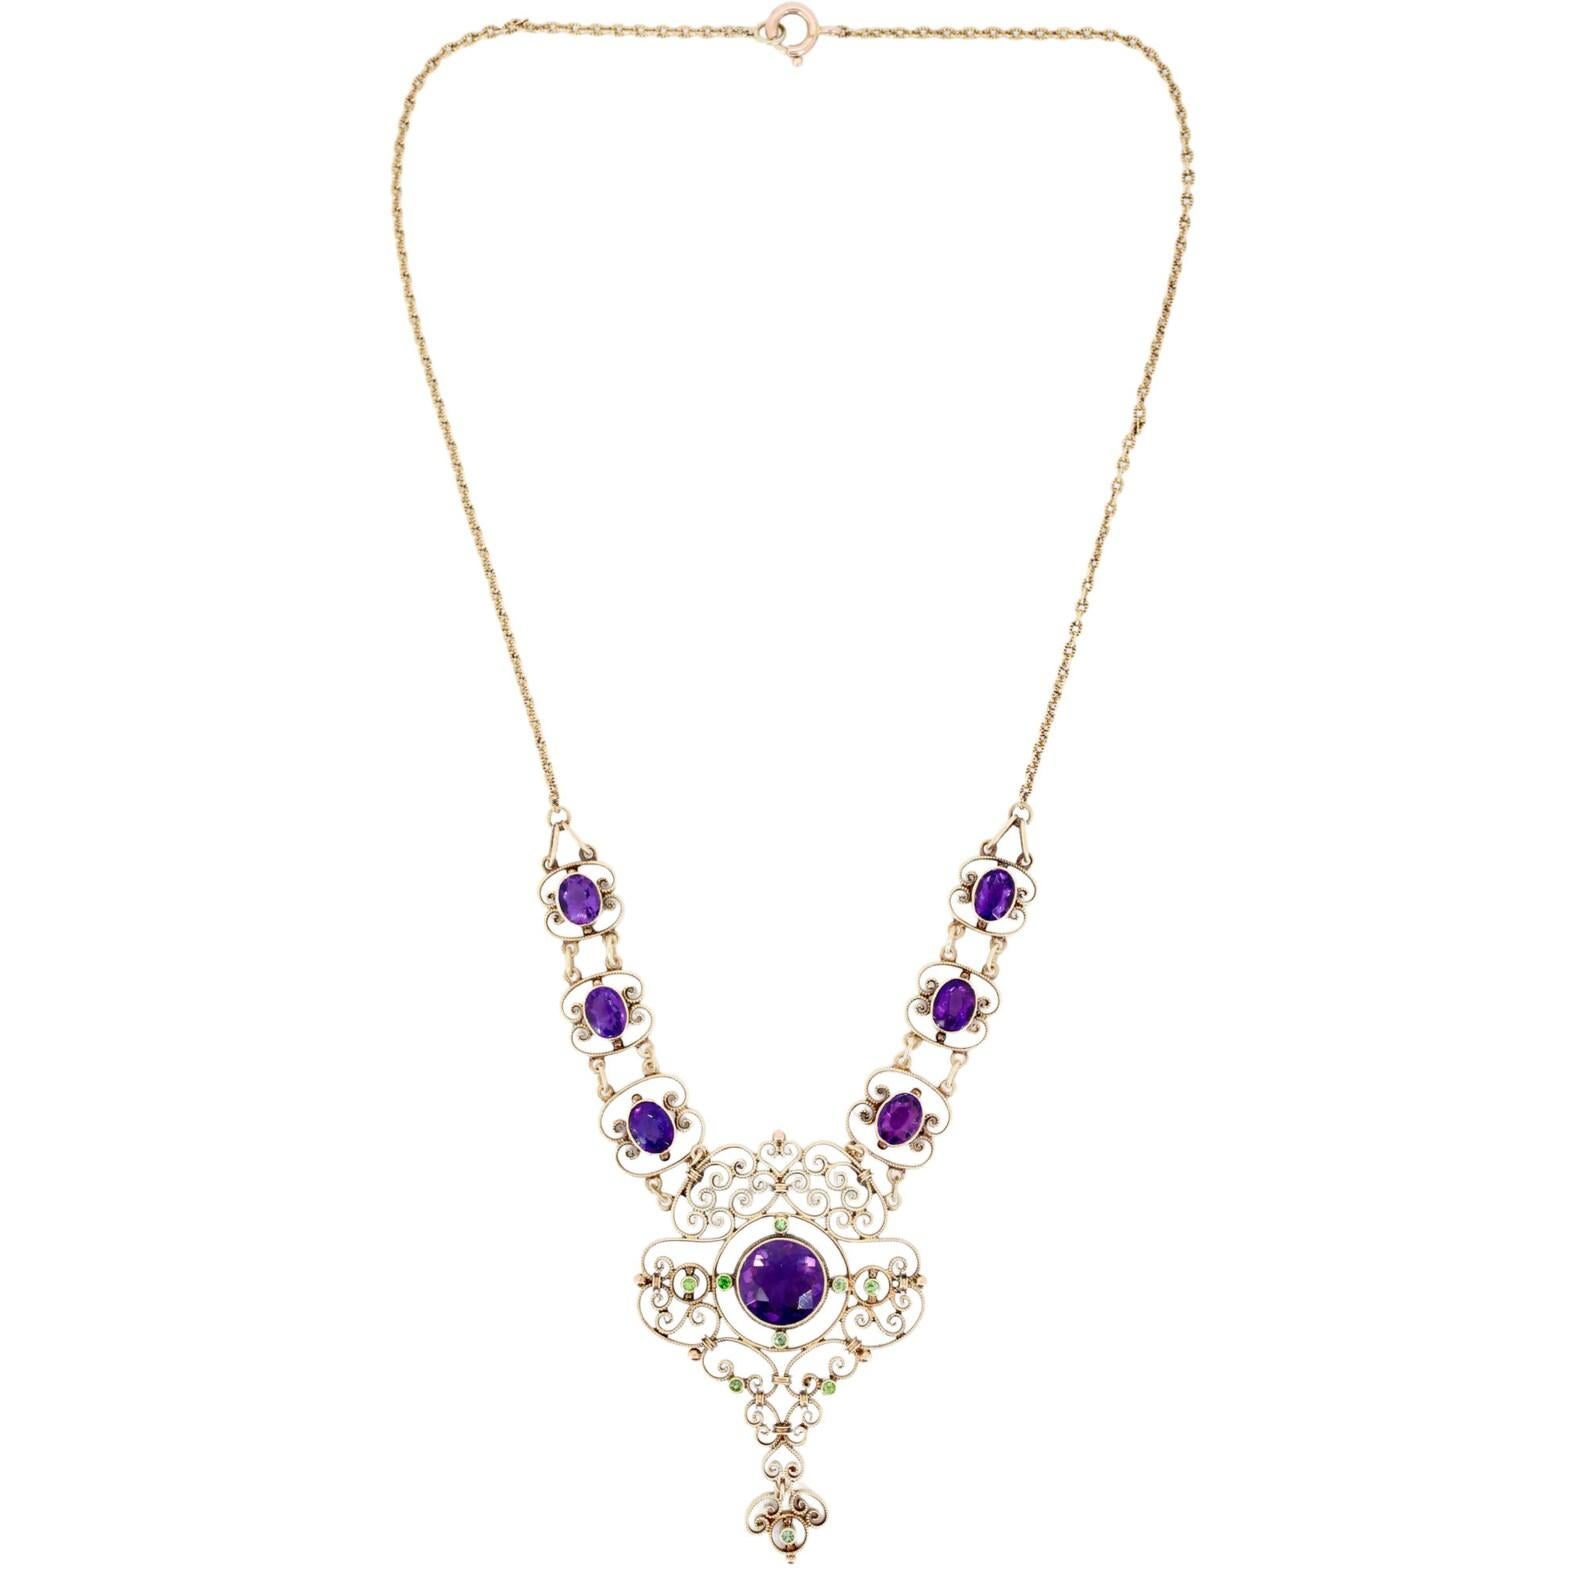 An Edwardian period amethyst, and demantoid garnet lavalier necklace in 15 karat gold. Crafted in England at the turn of the 20th century, this beautiful piece of jewelry also holds an important meaning. Used together, the colors of the purple